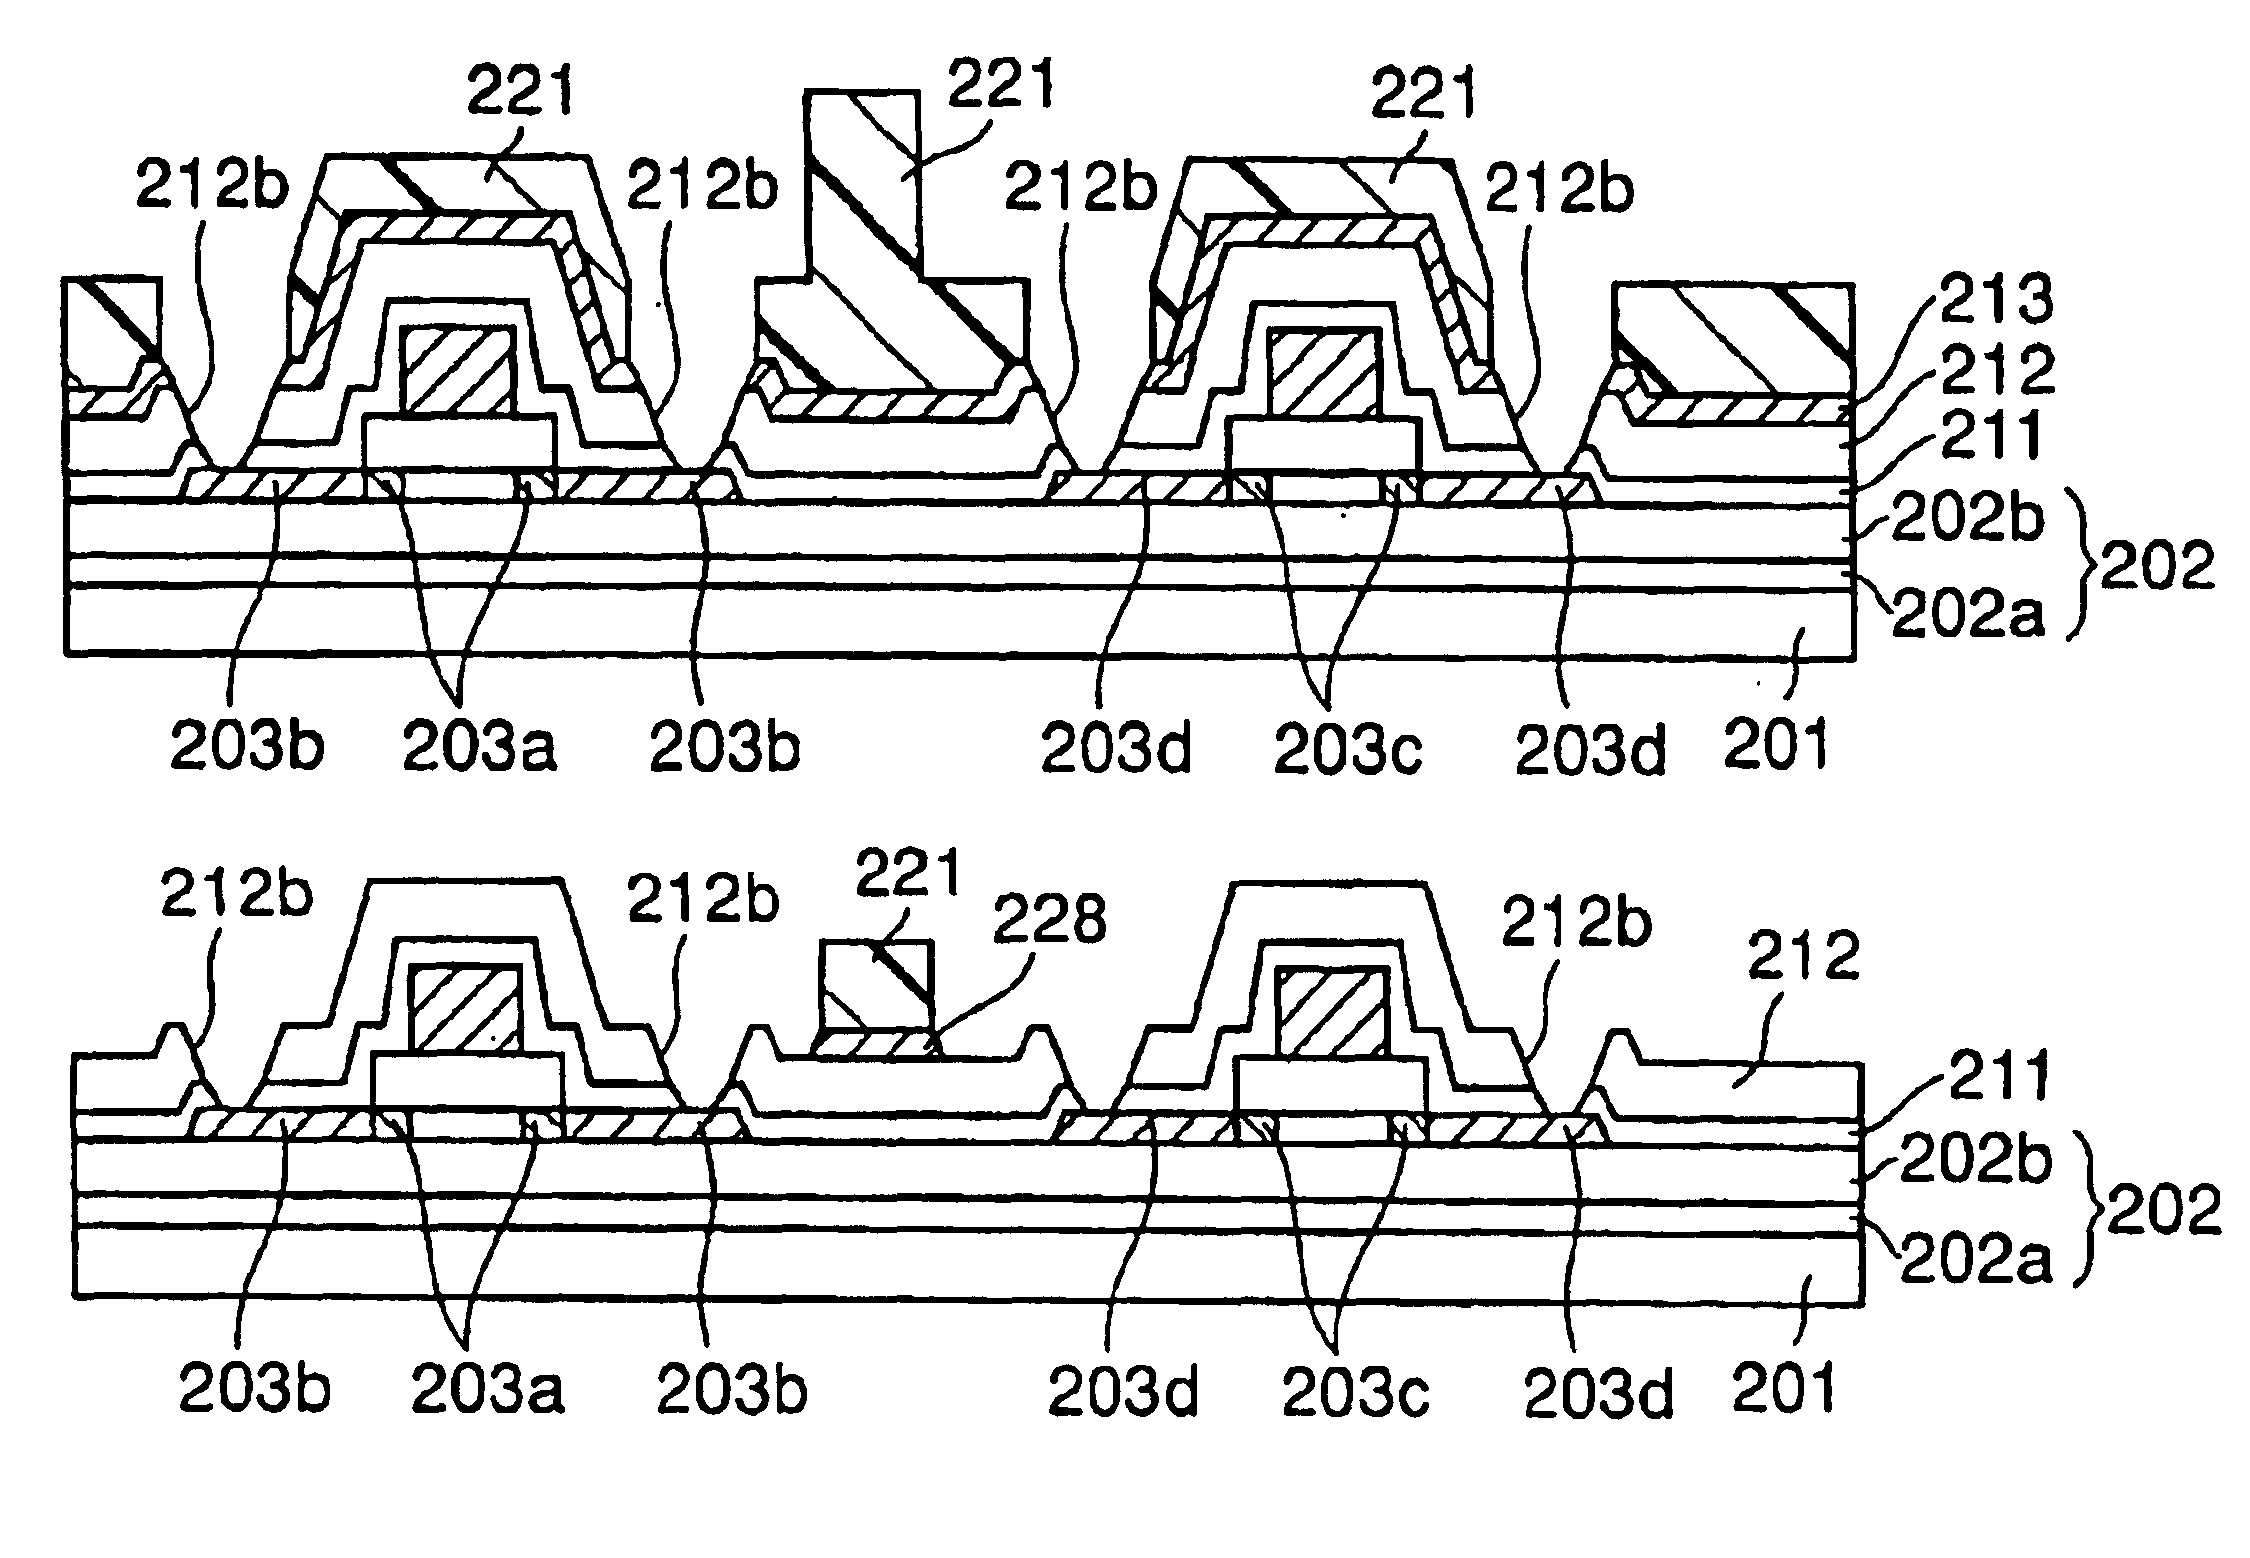 Thin film transistor device and method of manufacturing the same